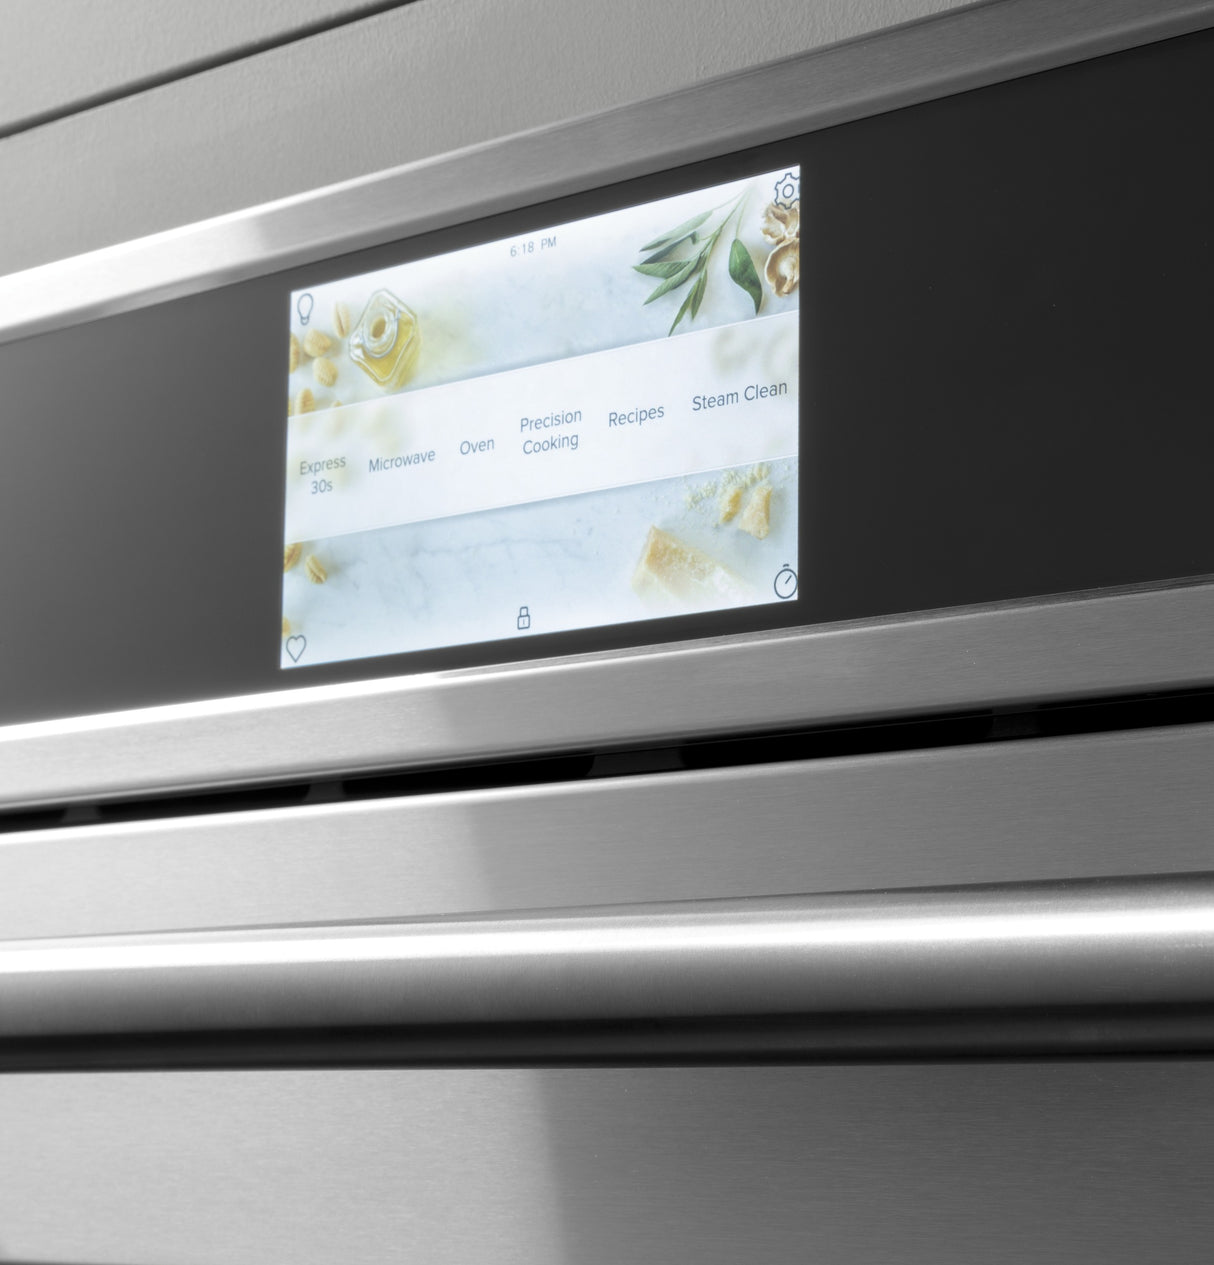 Caf(eback)(TM) 30" Smart Five in One Oven with 120V Advantium(R) Technology - (CSB913P2NS1)